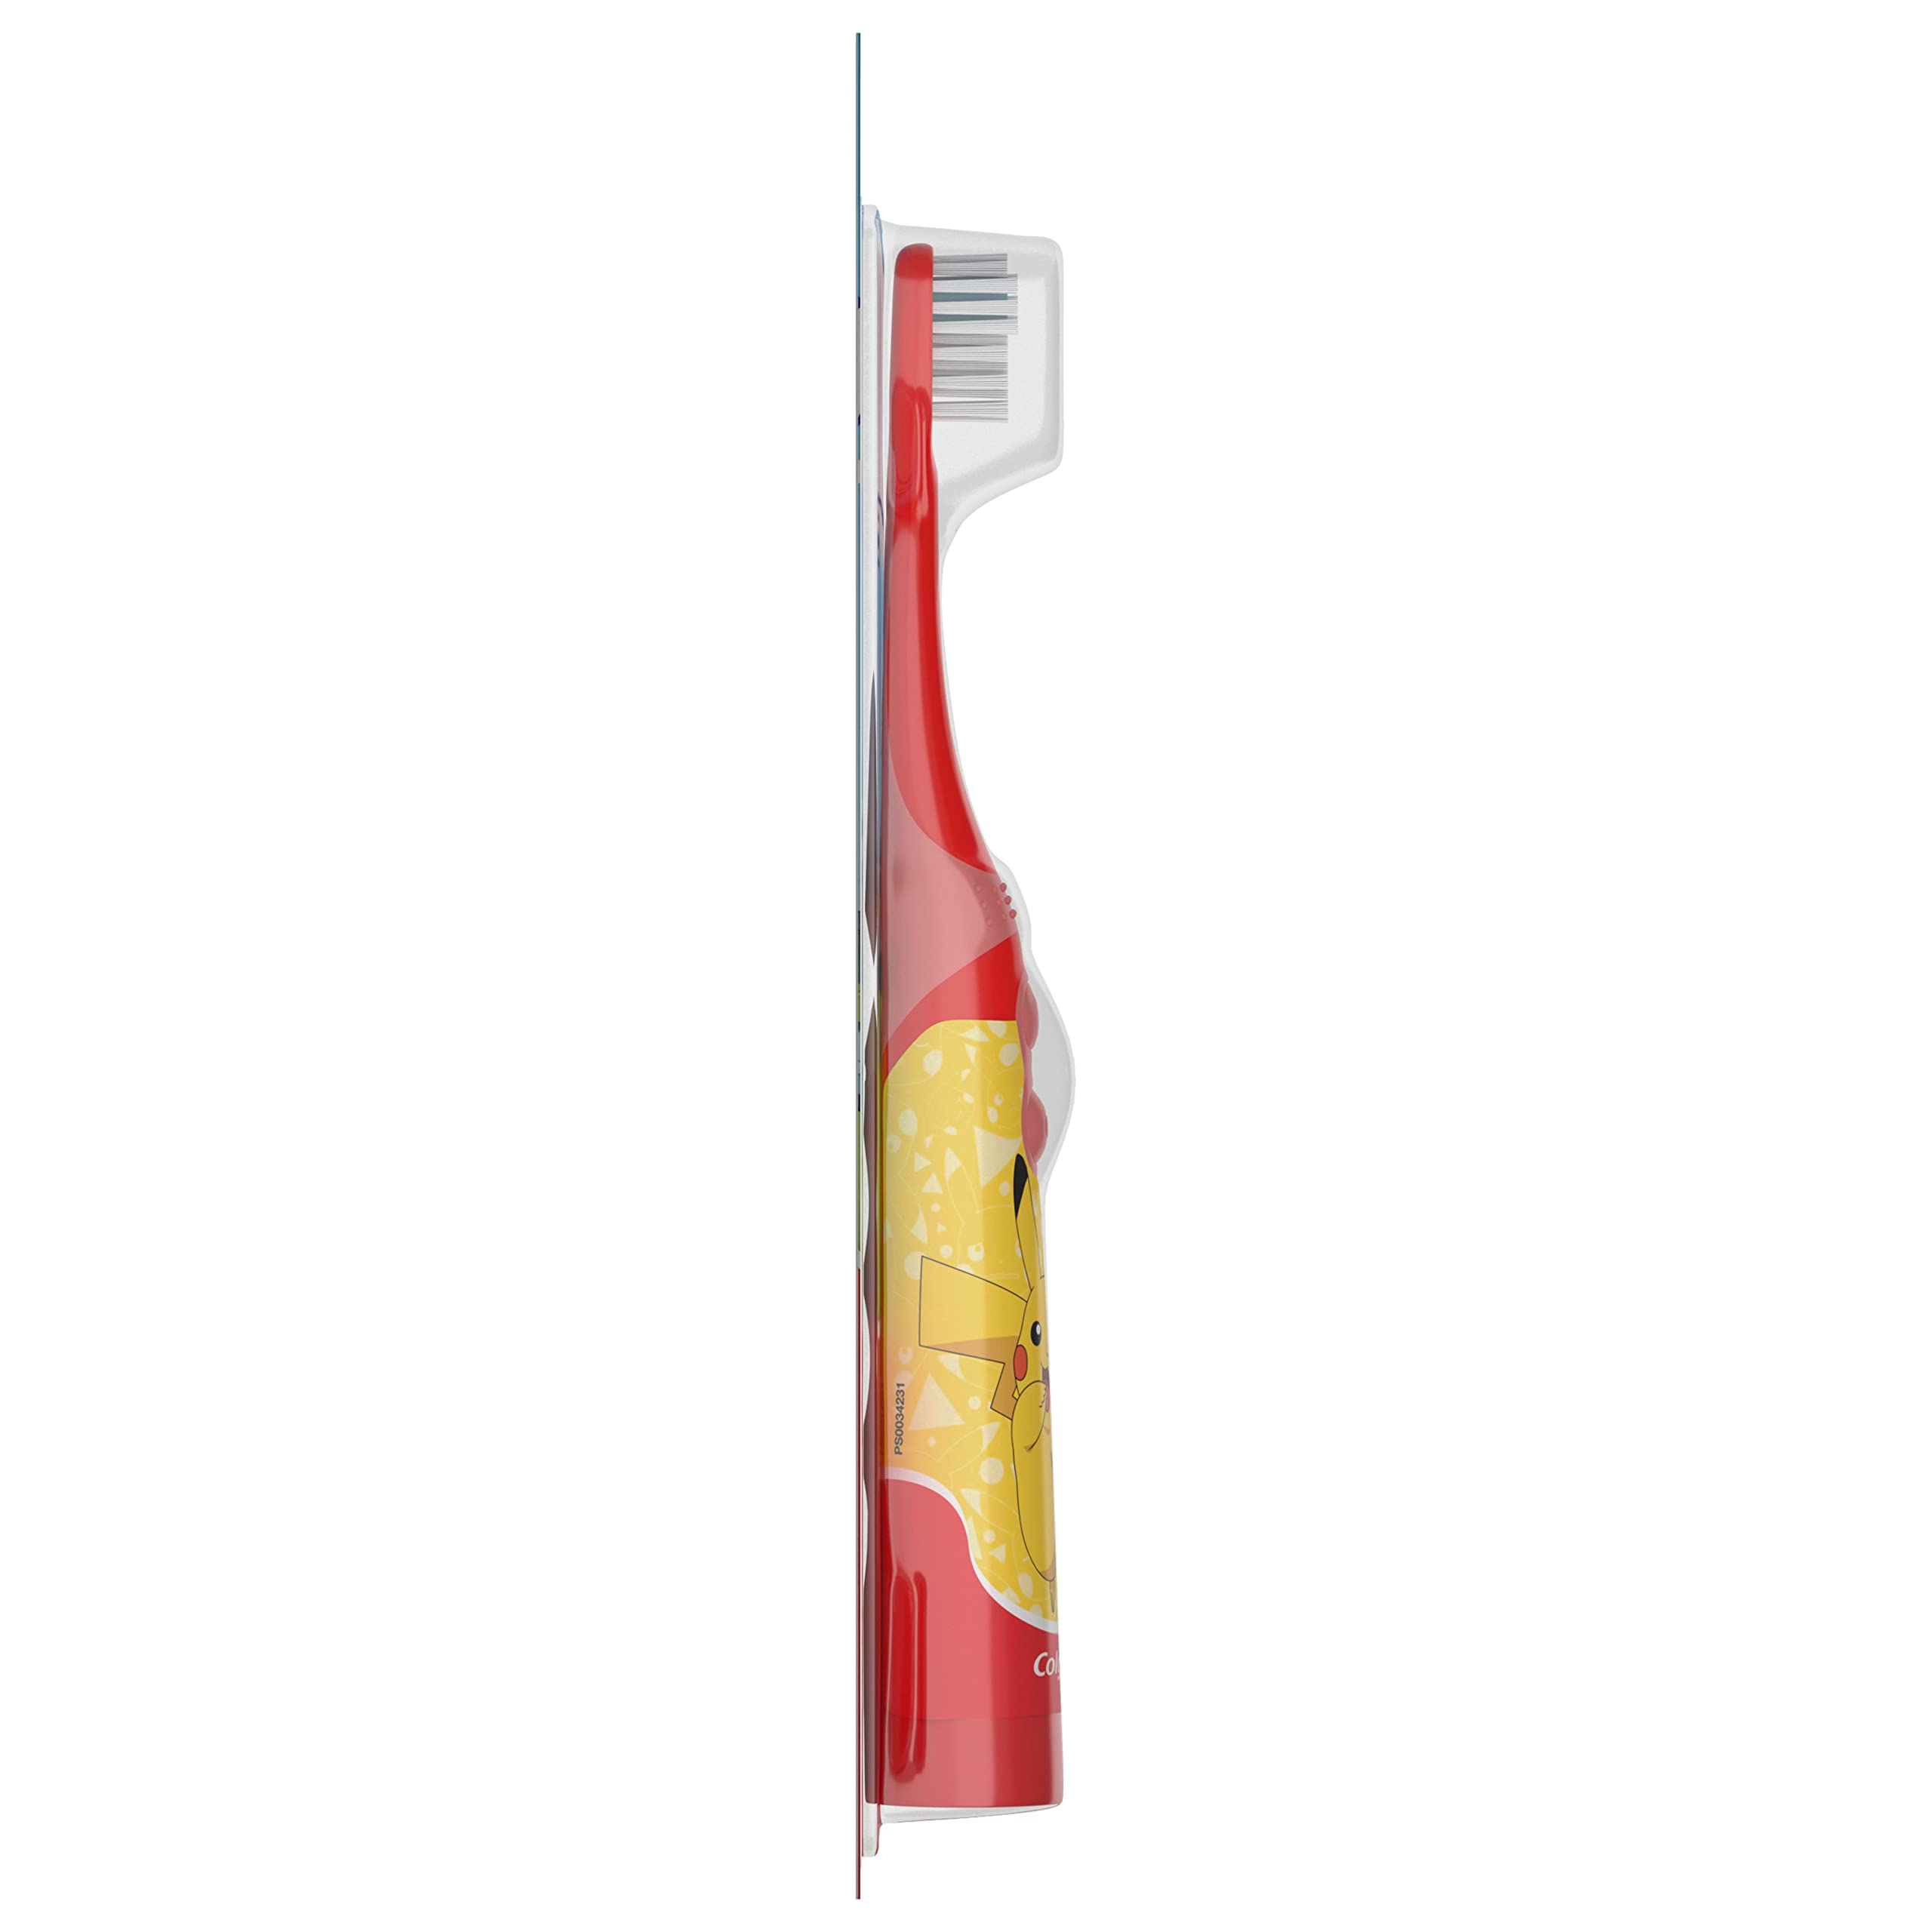 Colgate Kids Battery Powered Toothbrush, Kids Battery Toothbrush with Included AA Battery, Extra Soft Bristles, Flat-Laying Handle to Prevent Rolling, Pokemon Toothbrush, 1 Pack (Style May Vary)